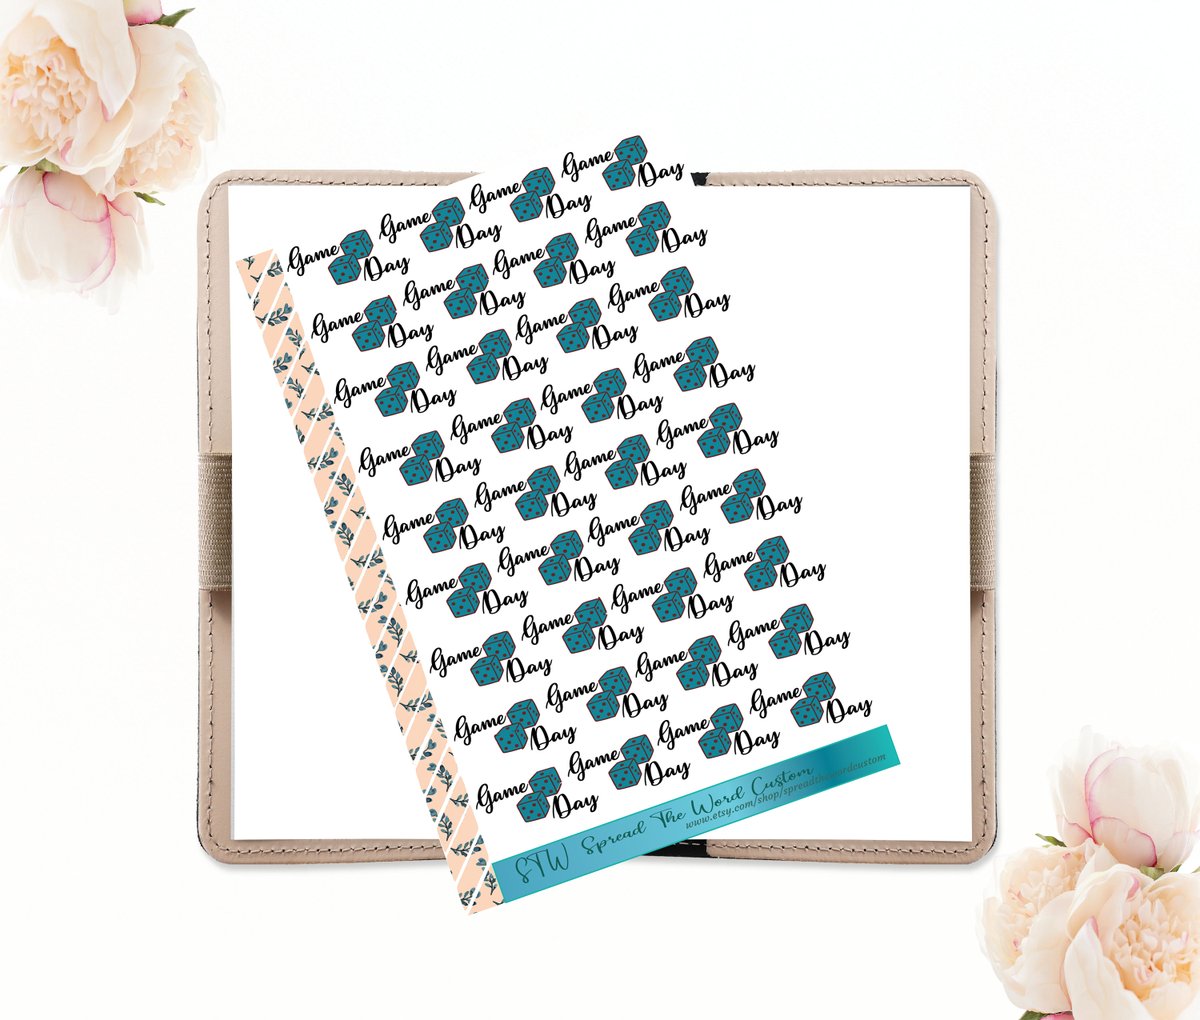 Excited to share the latest addition to my #etsy shop: Game Day Family night planner labels / sticker labels / etsy.com/shop/spreadthe… #erincondren #plannerlabels #stickerlabels #labelstickers #freeshipping #happyplanner #eclabels #plumplanner